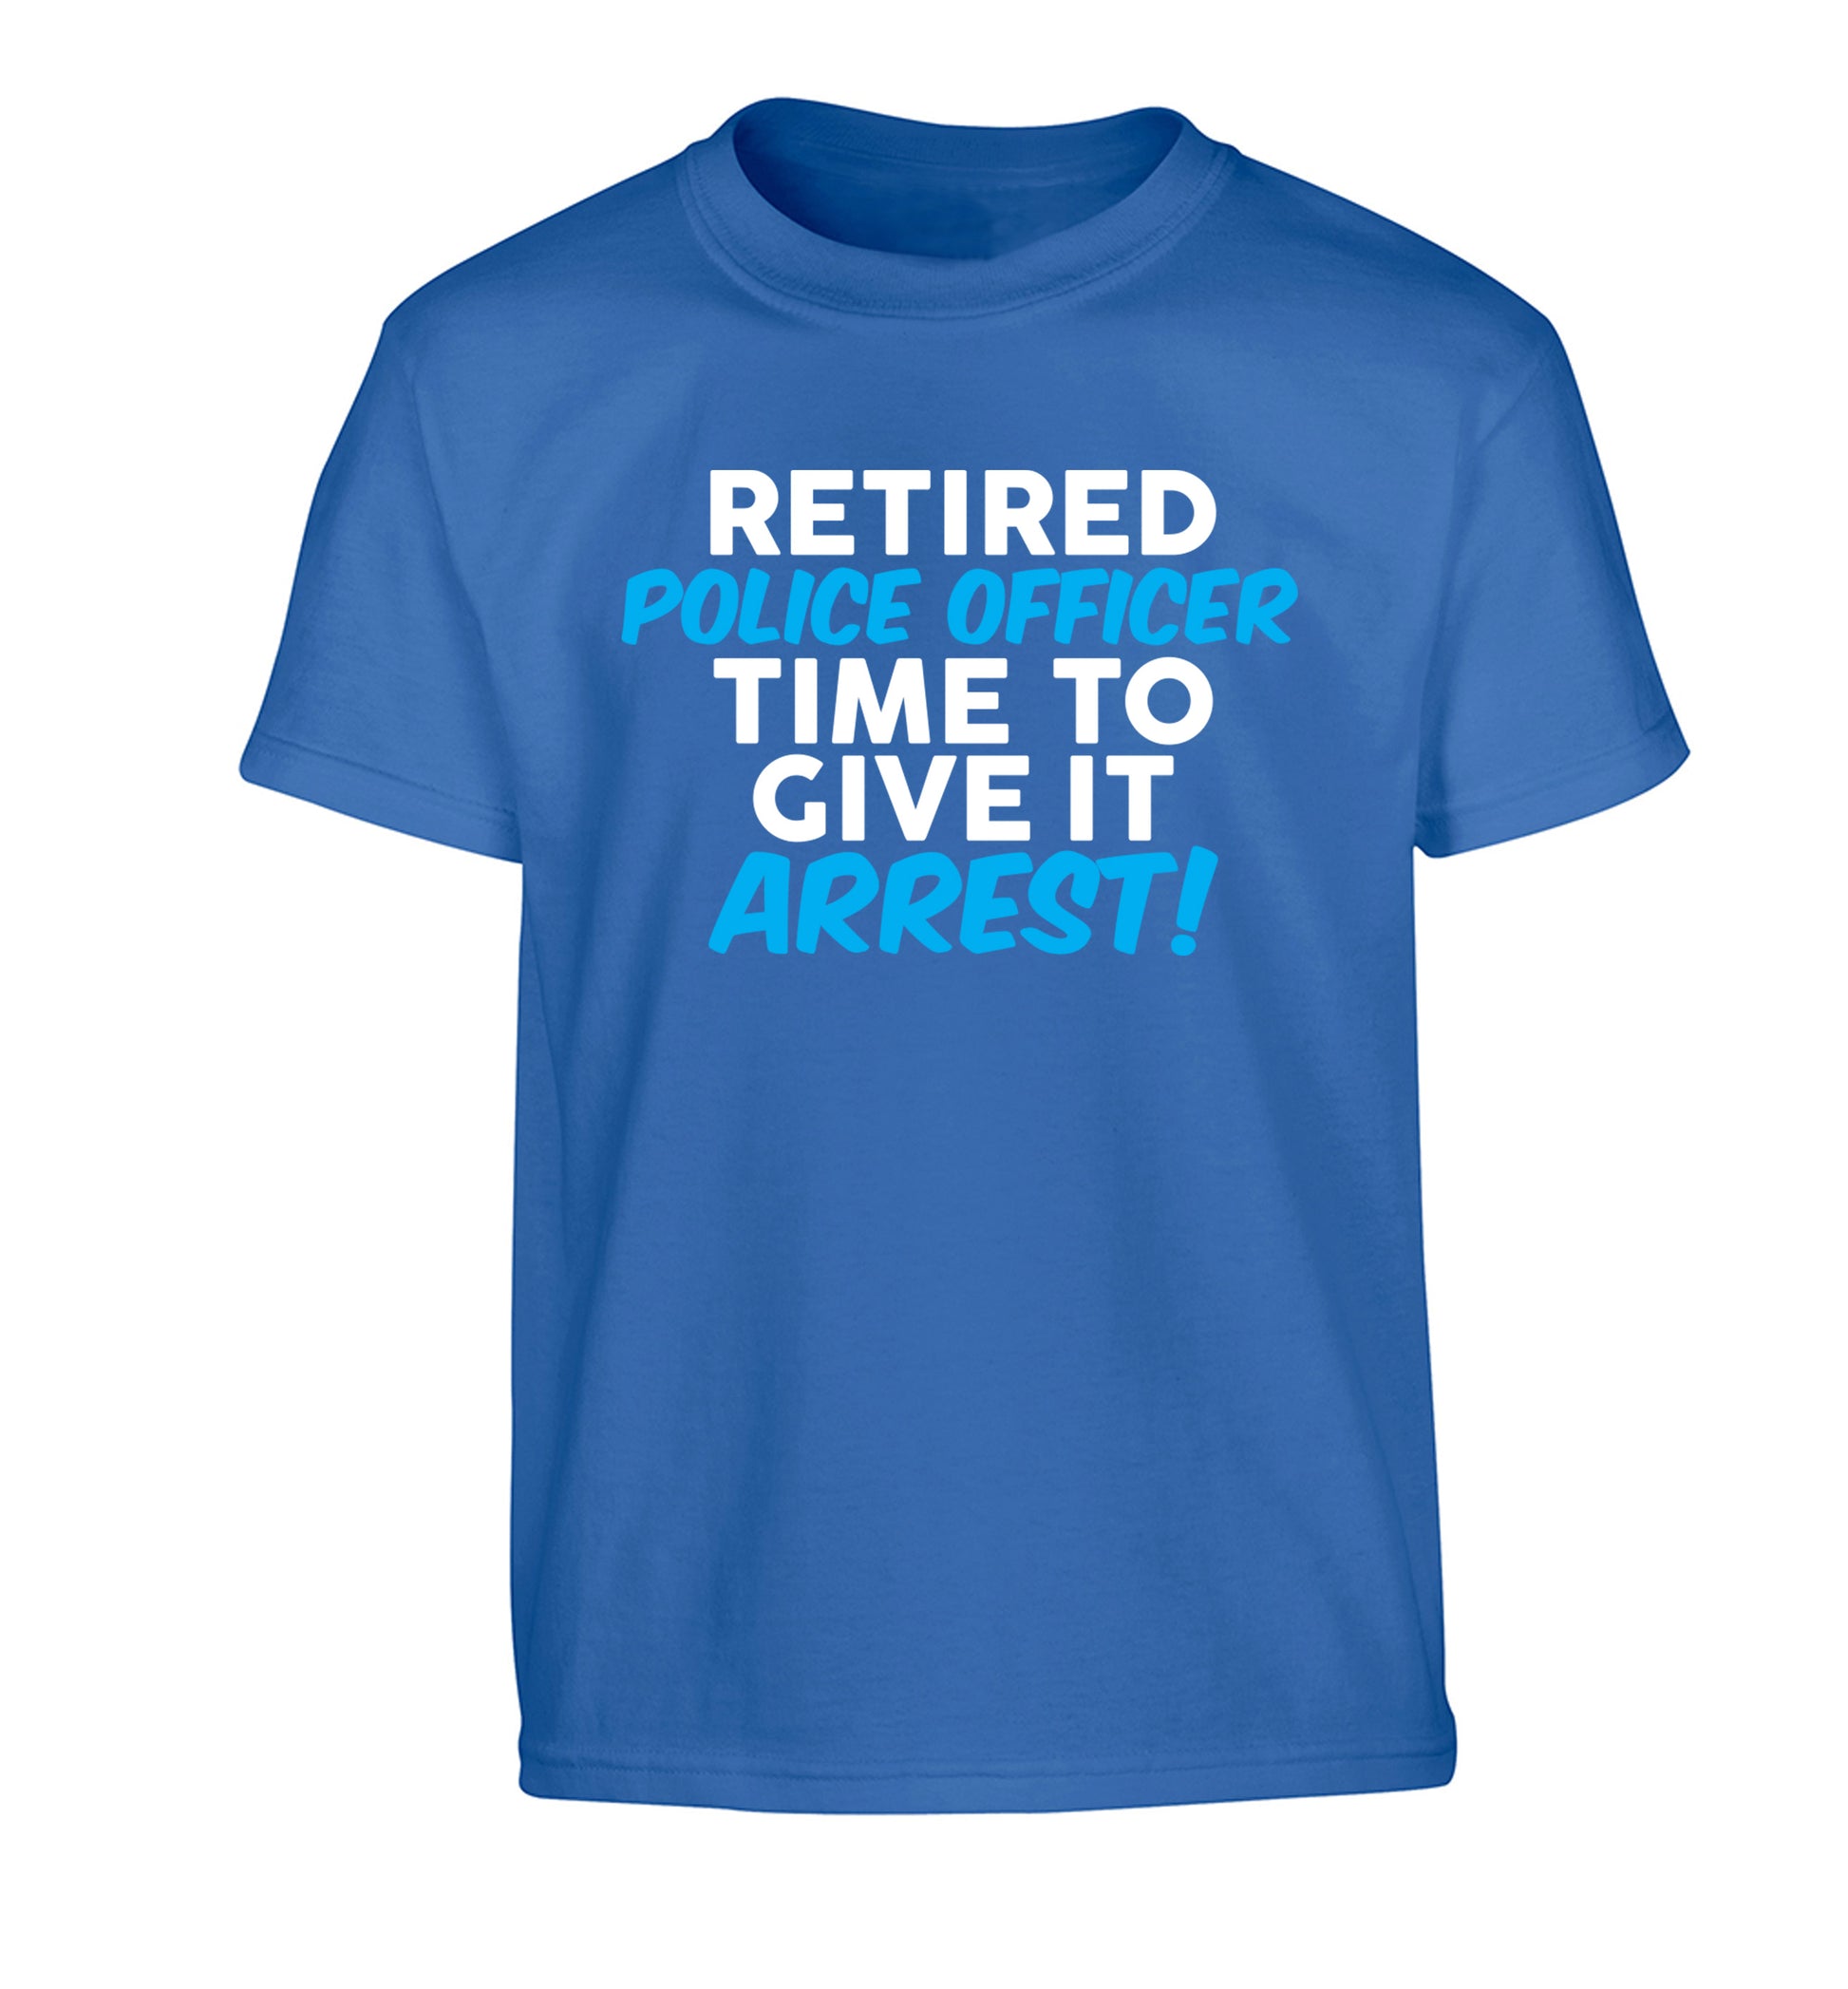 Retired police officer time to give it arrest Children's blue Tshirt 12-13 Years